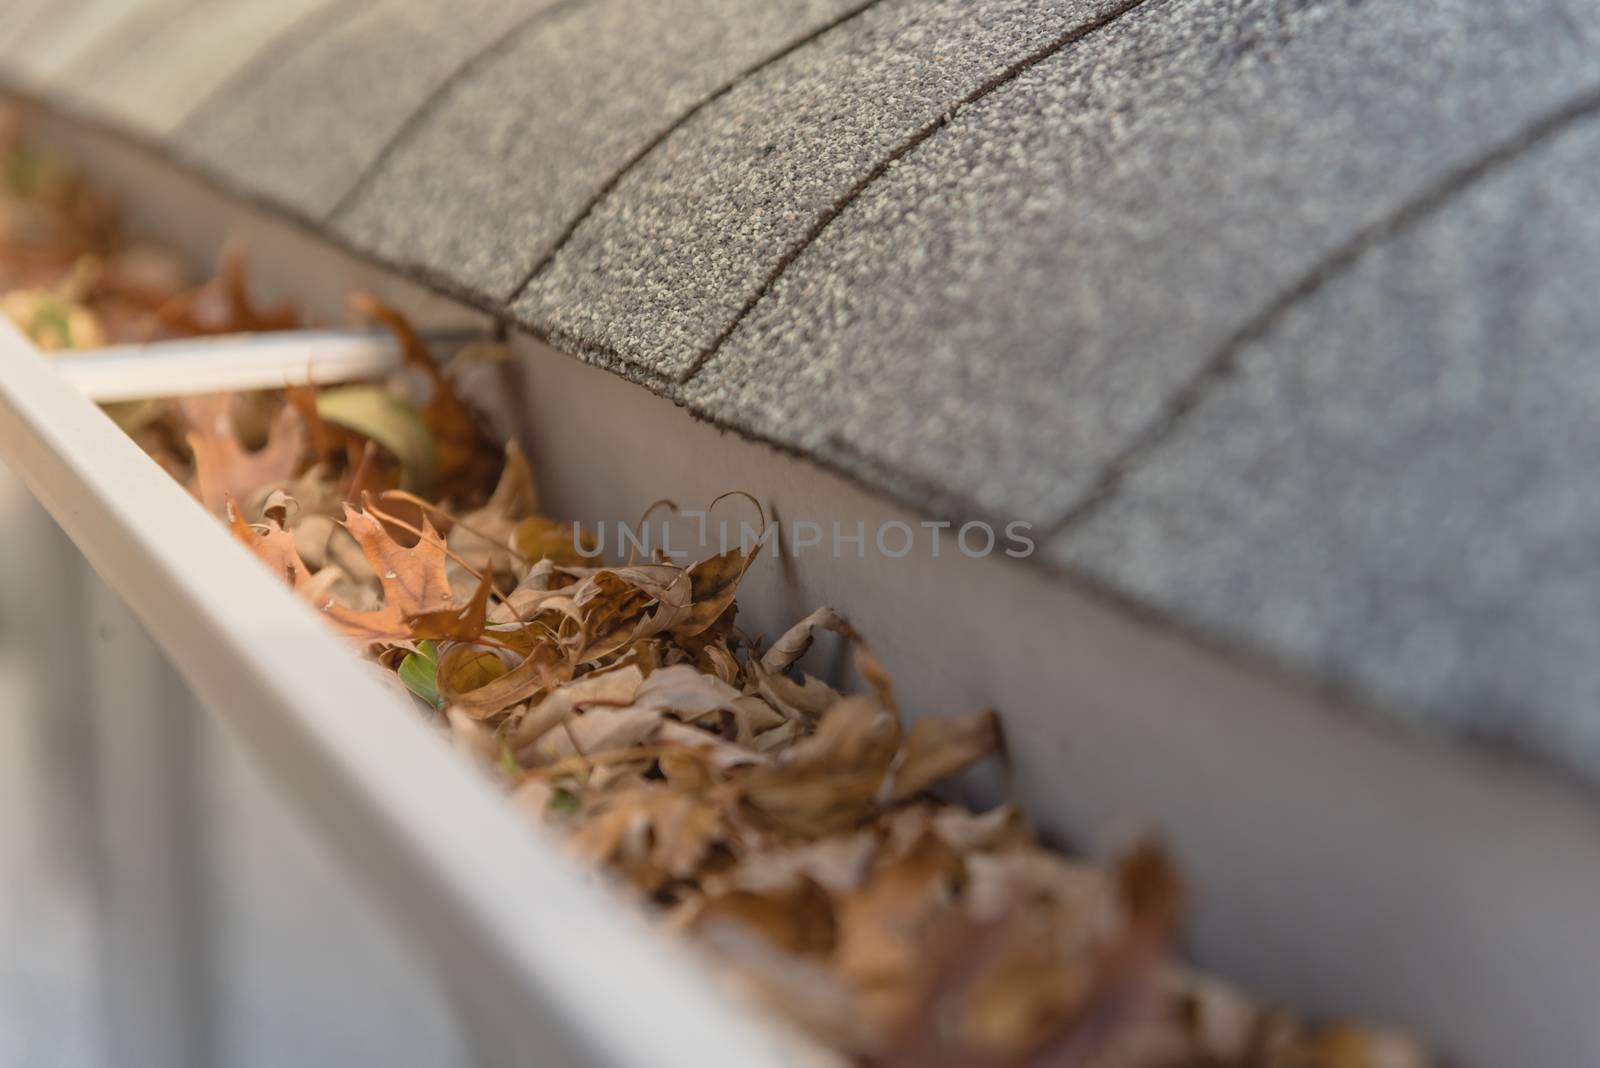 Blocked gutter full of autumn dried leaves and debris clogging in Texas, America by trongnguyen